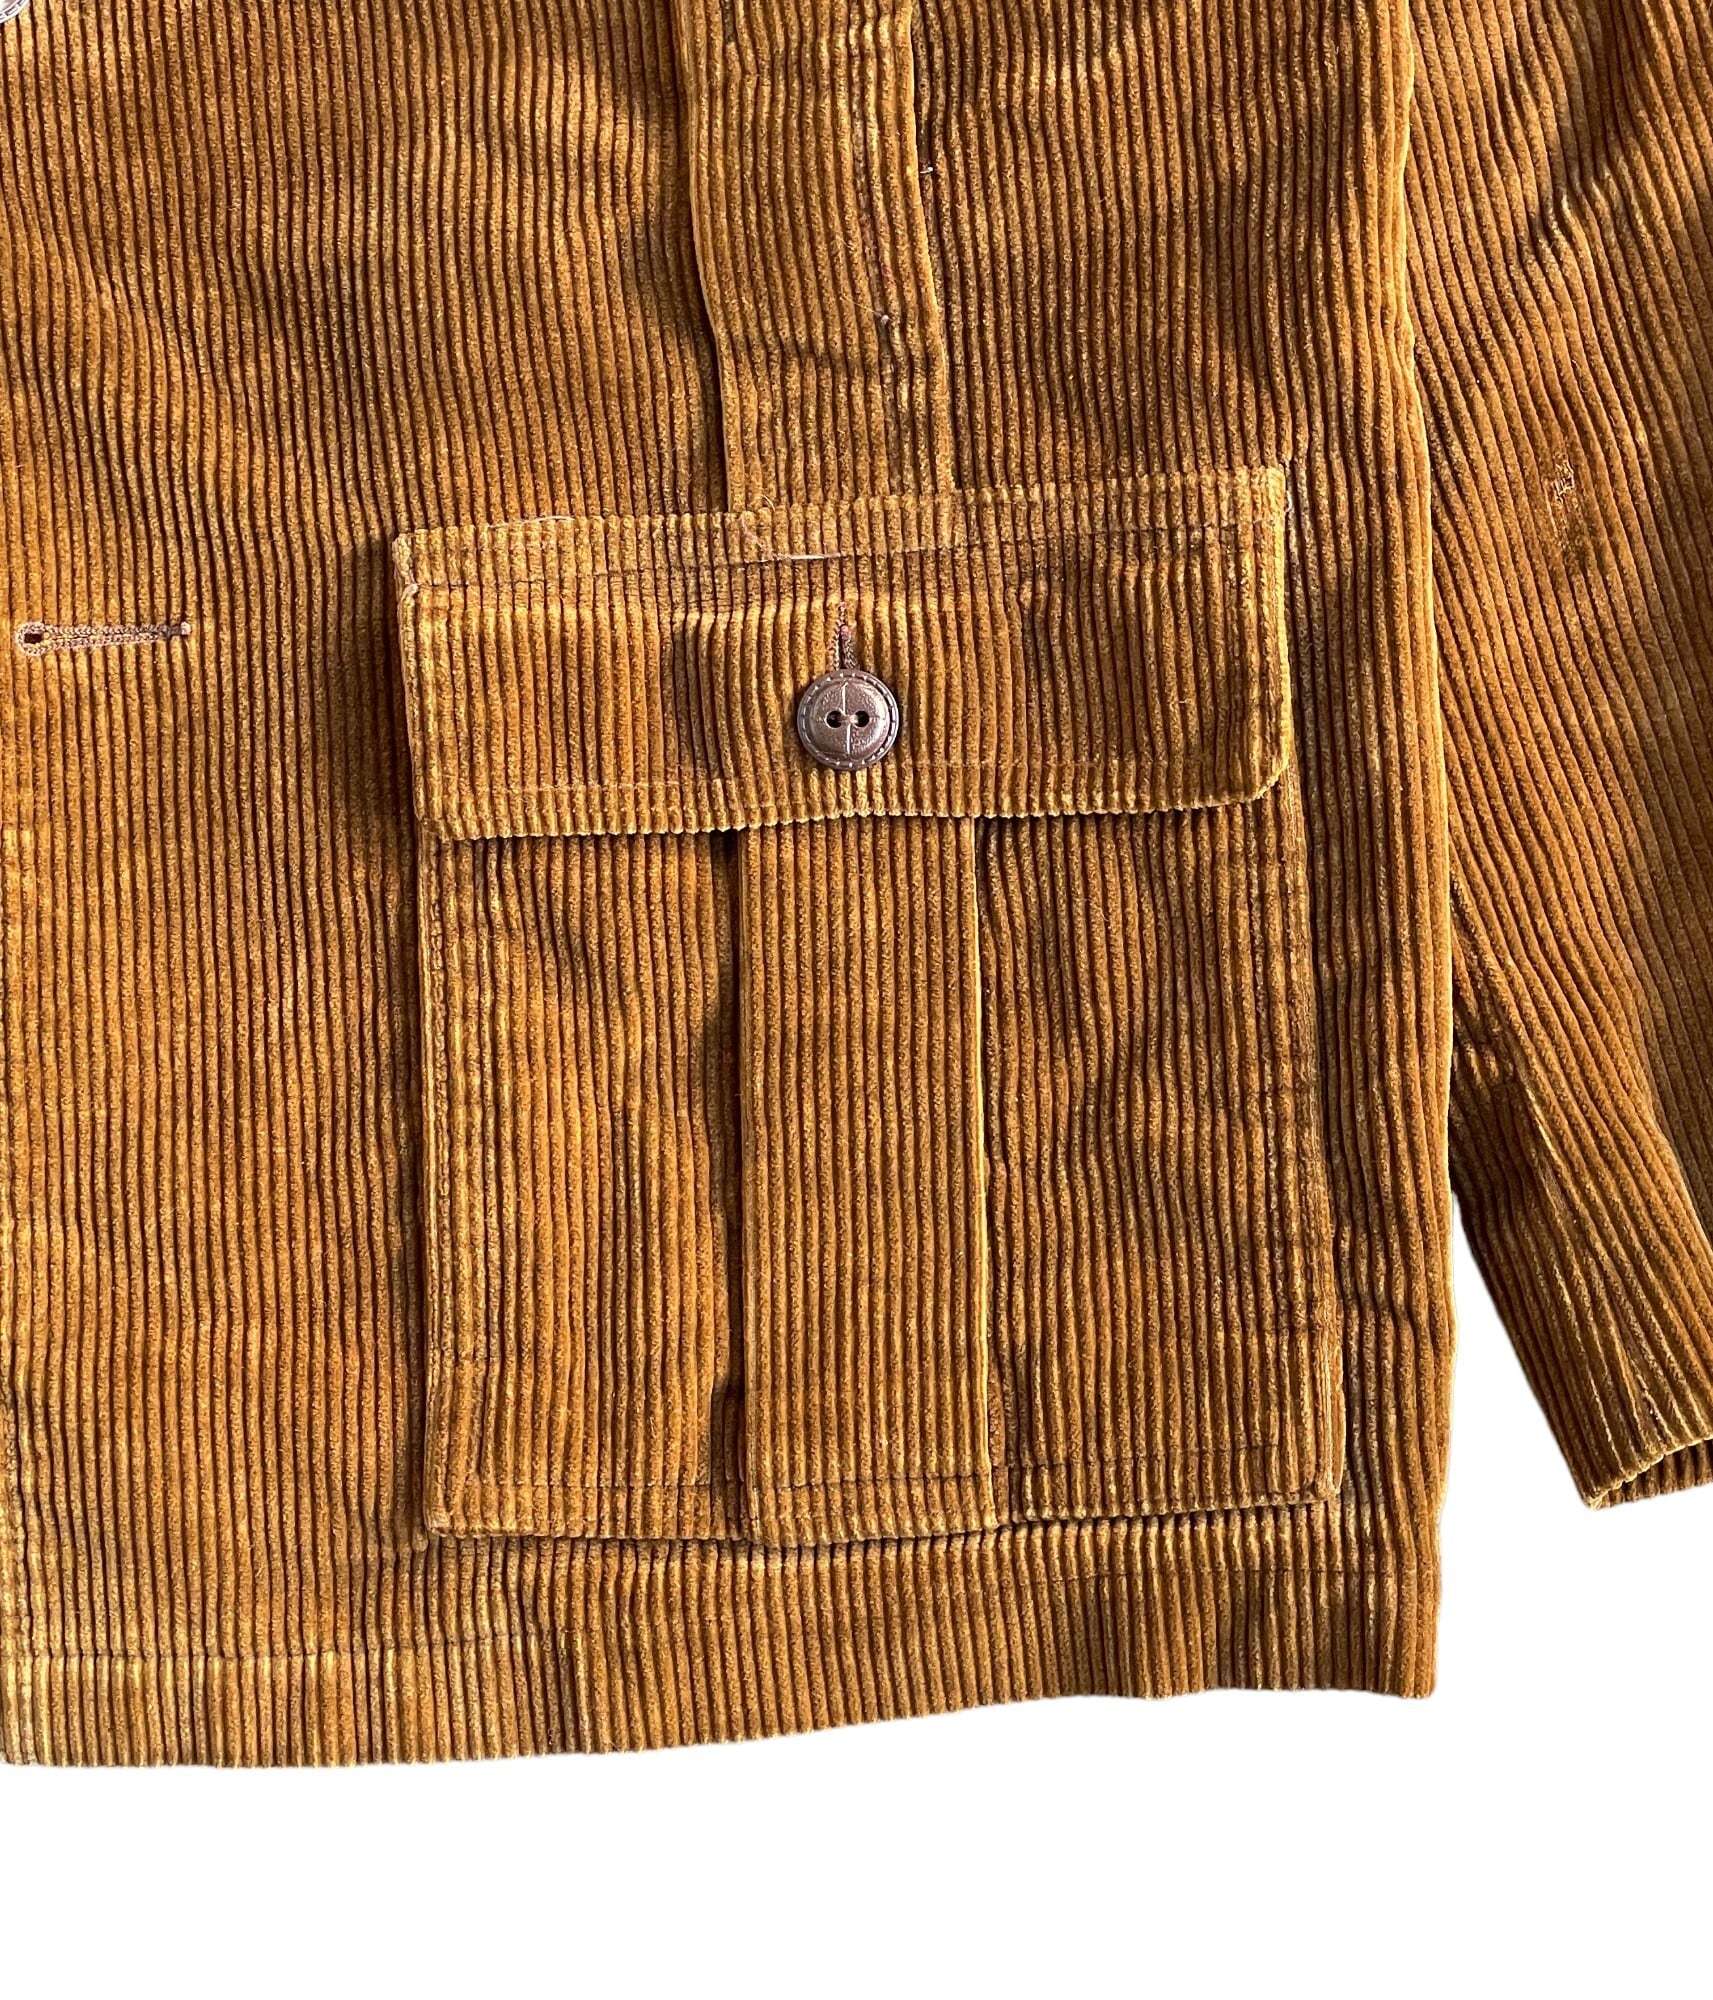 Vintage 60s corduroy jacket -Derby of San Francisco- | BEGGARS  BANQUET公式通販サイト　古着・ヴィンテージ